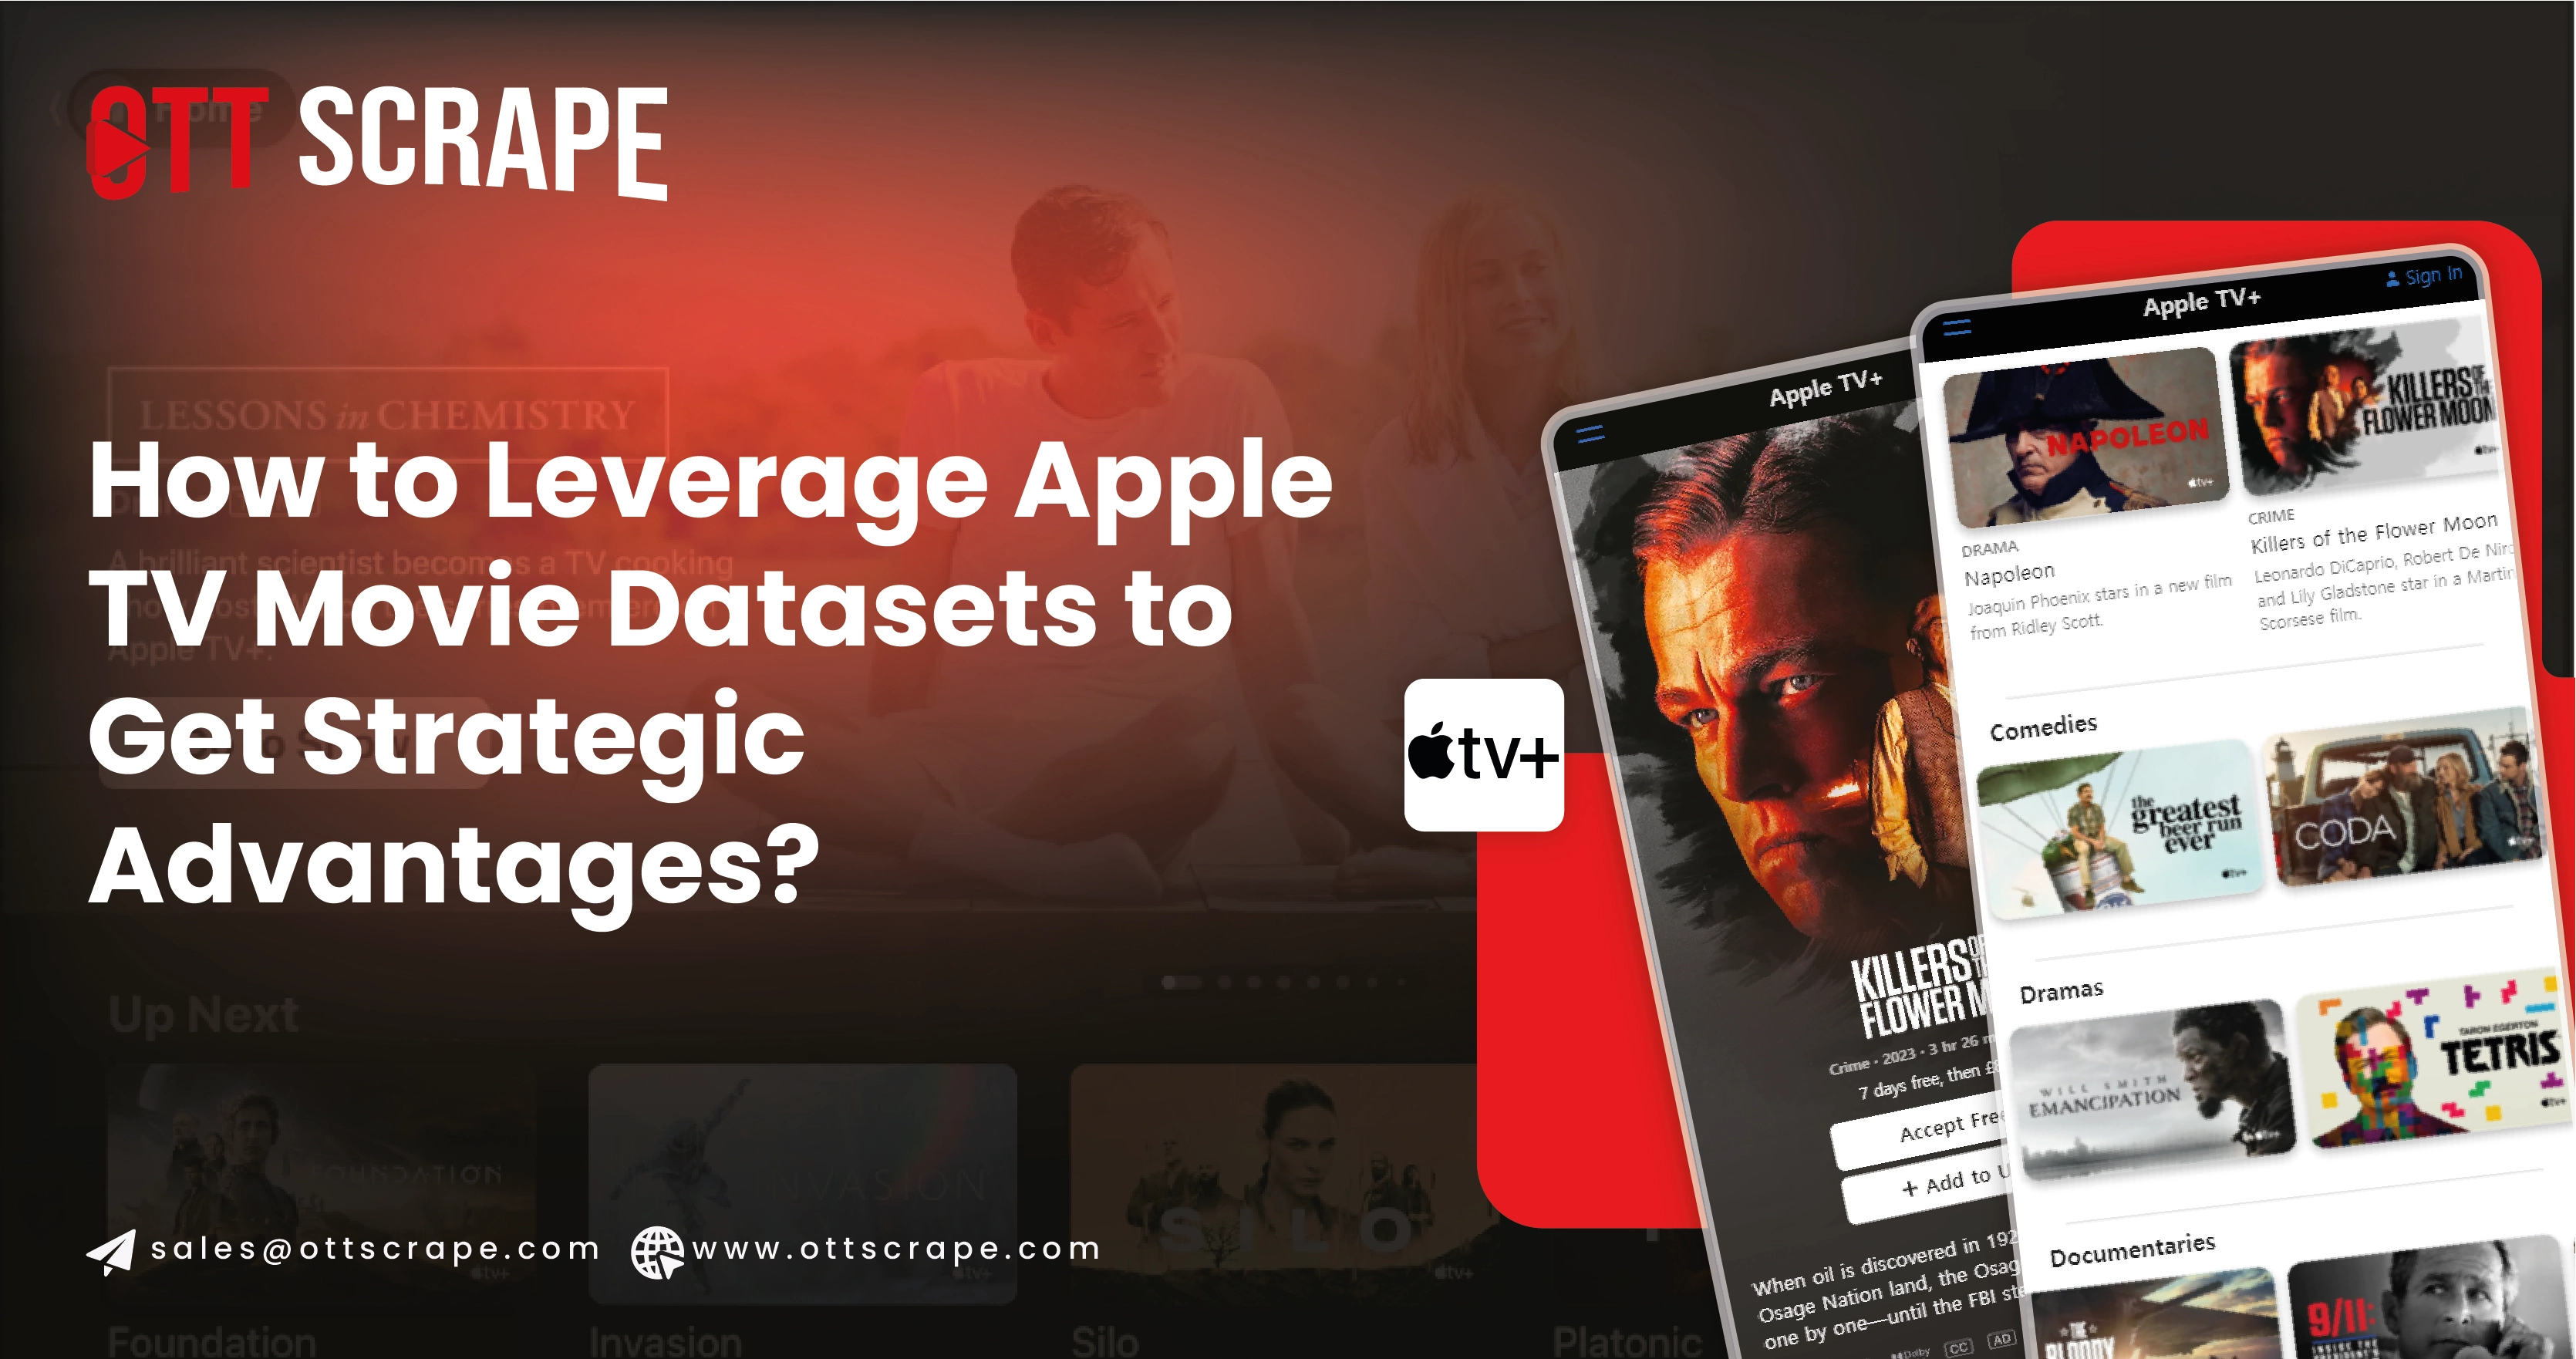 How-to-Leverage-Apple-TV-Movie-Datasets-to-Maximize-Insights-and-Get-Strategic-Advantages-01